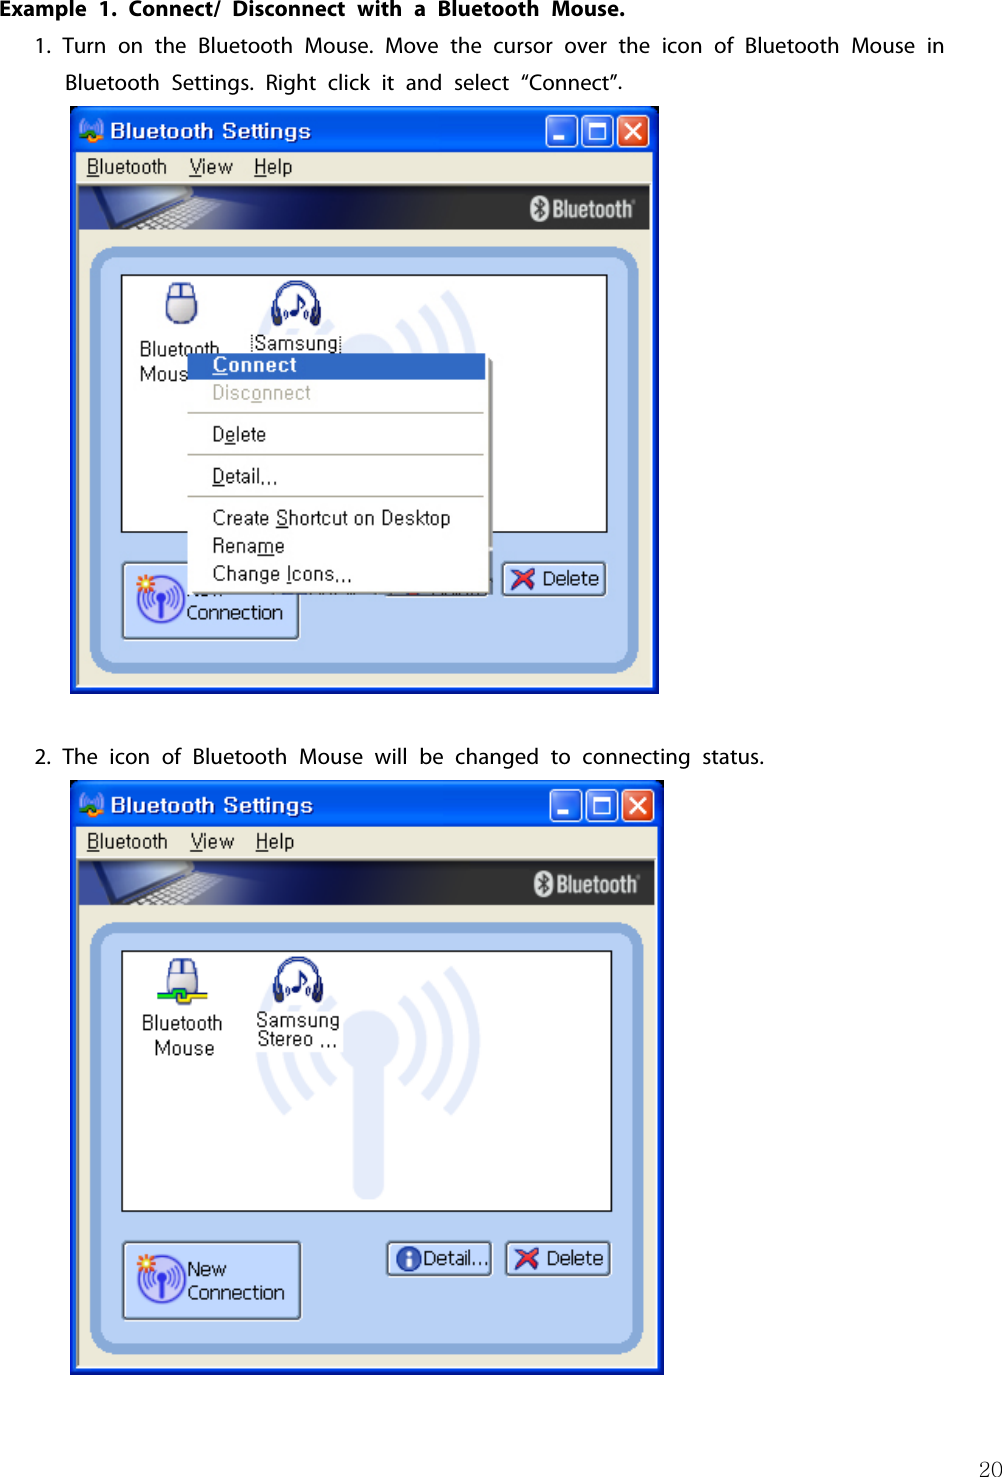 20Example 1. Connect/ Disconnect with a Bluetooth Mouse.1. Turn on the Bluetooth Mouse. Move the cursor over the icon of Bluetooth Mouse inBluetooth Settings. Right click it and select “Connect”.2. The icon of Bluetooth Mouse will be changed to connecting status.